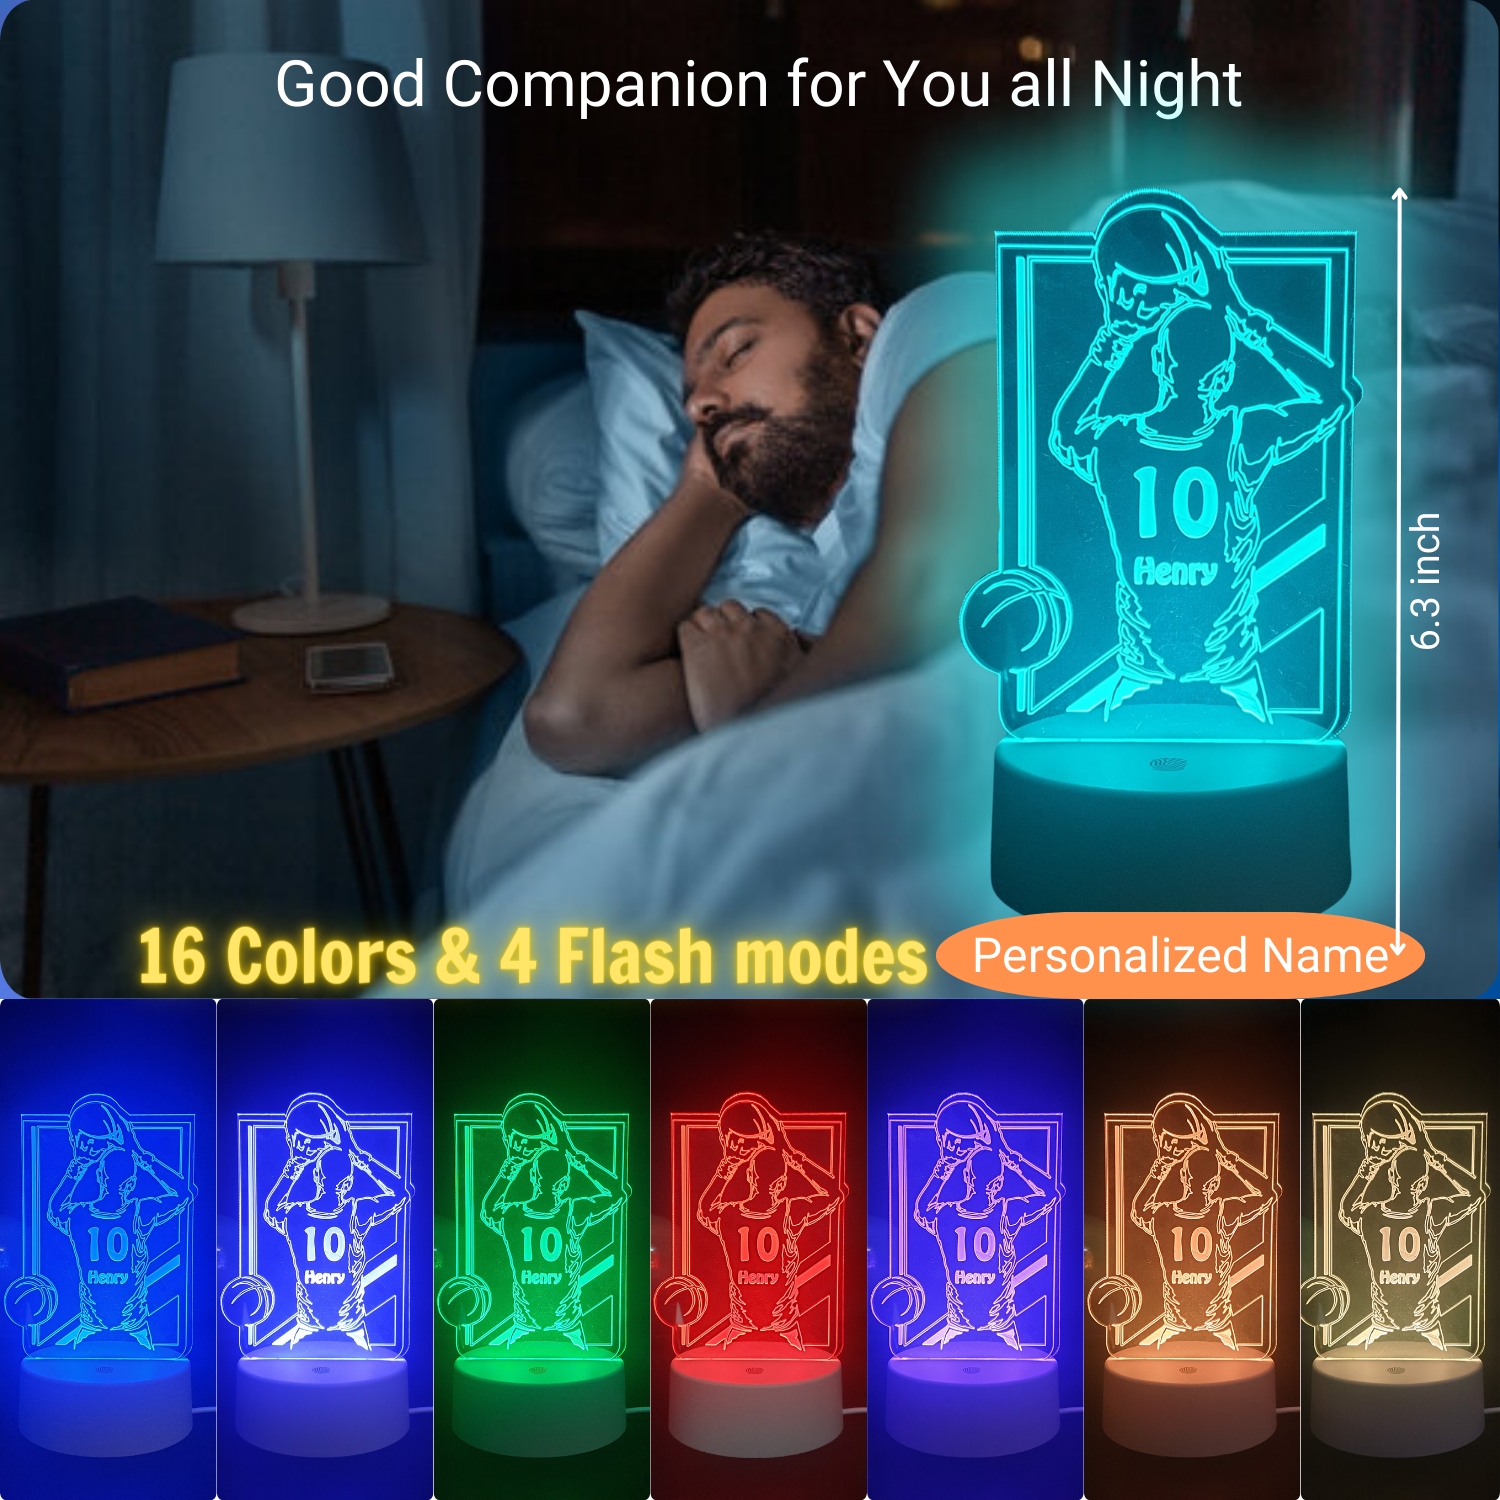 3D Illusion Lamp Basketballman04 Player, 3D Night Light Basketballman with Remote Control Desk Visual Lamp 16 Changeable Colors Birthday Gifts Night Lights for Man or Kids Home Décor